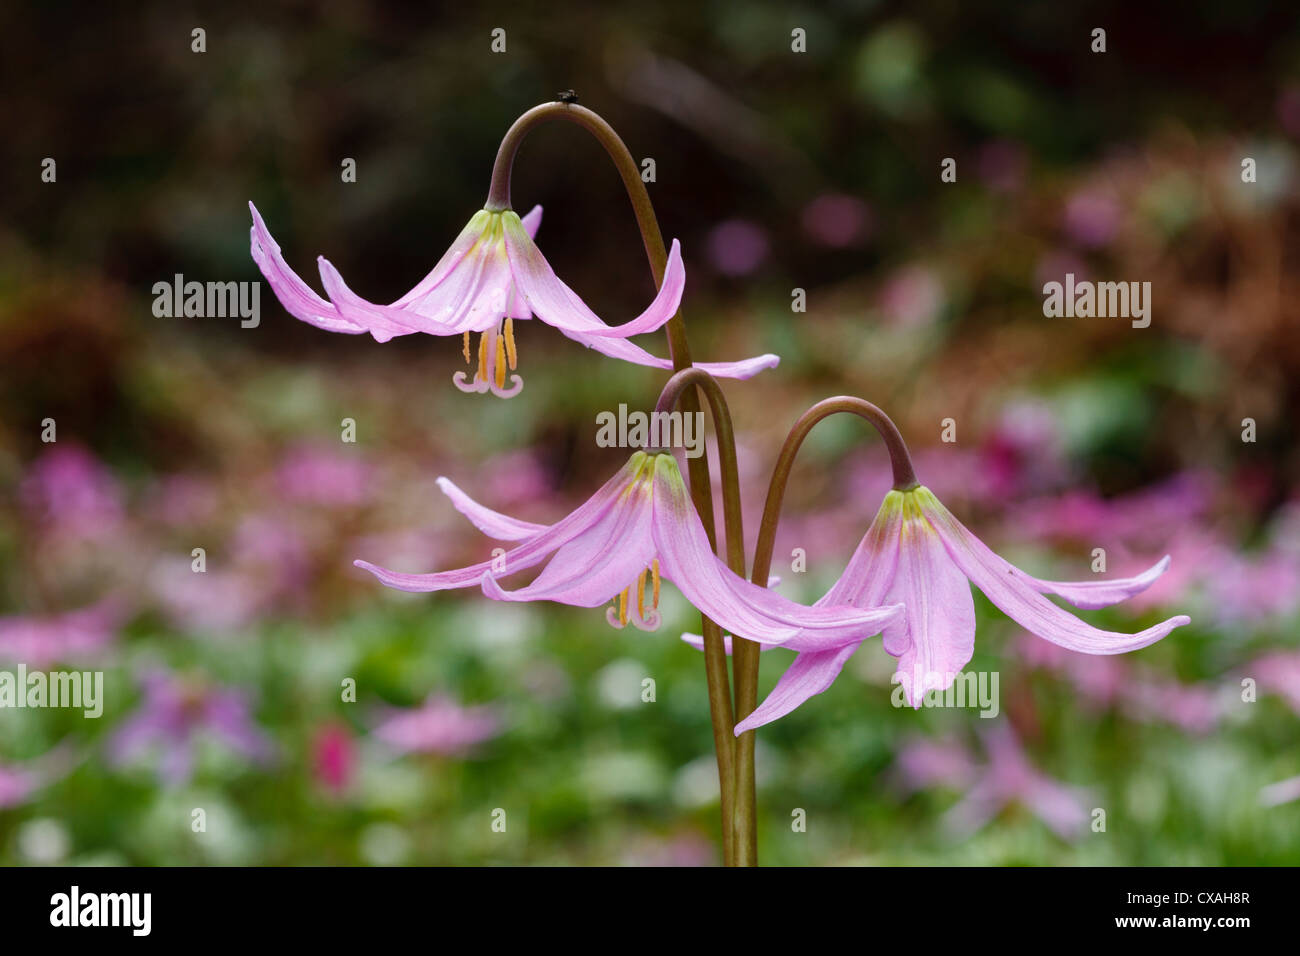 Dog's Tooth Violets (Erythronium sp.) flowering in a garden. Powys, Wales. April. Stock Photo